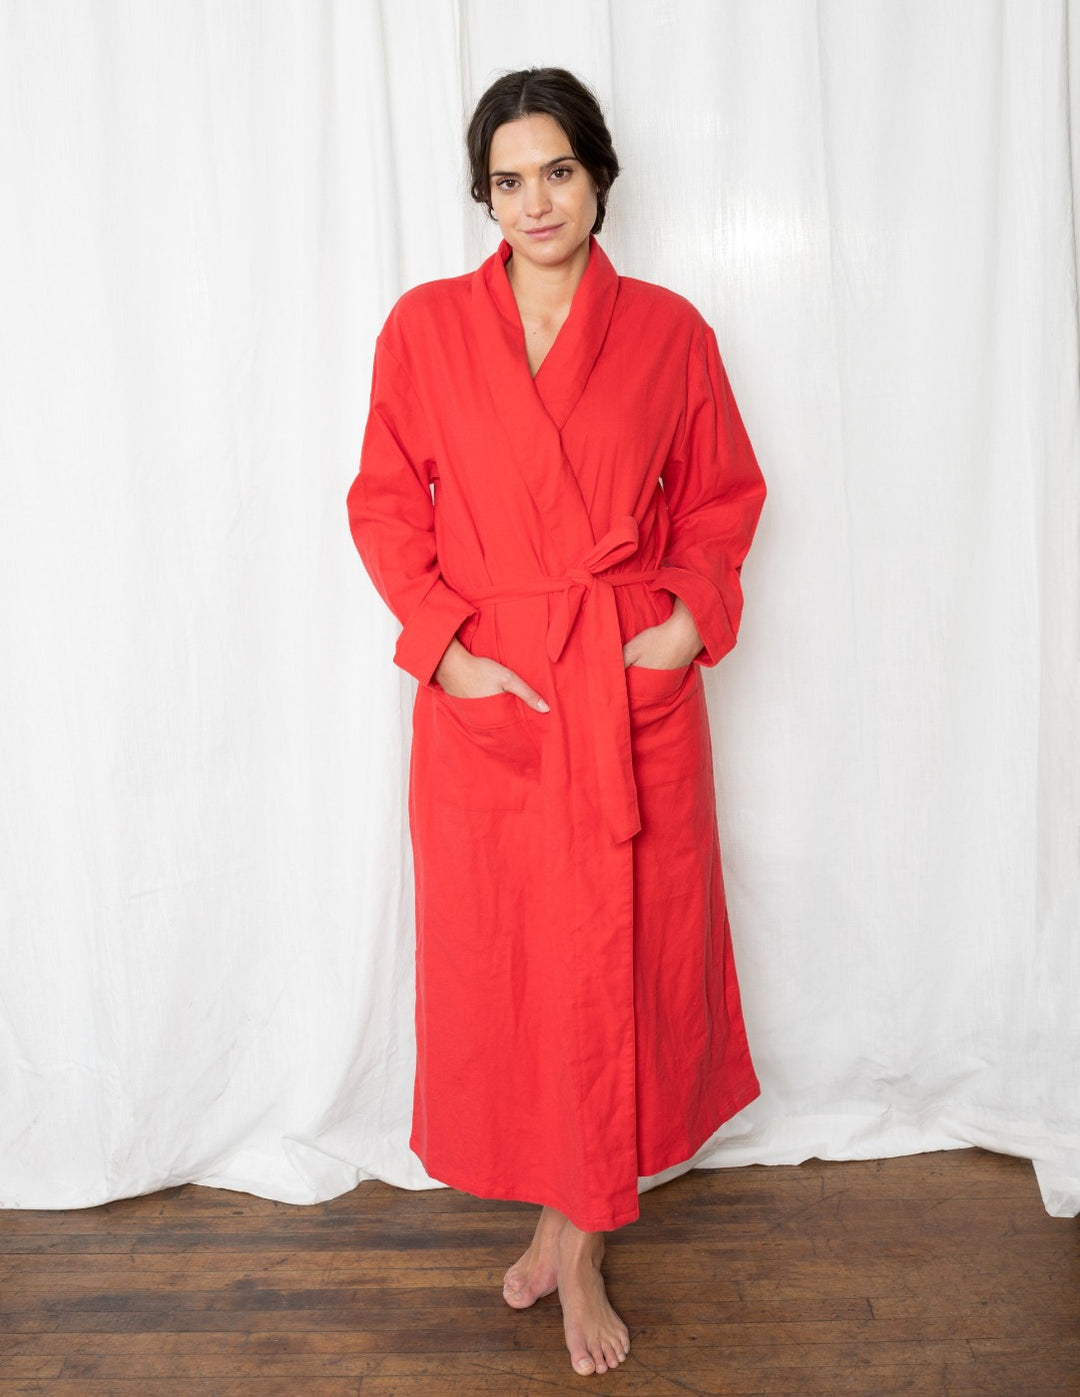 A woman standing in a red robe from Leveret